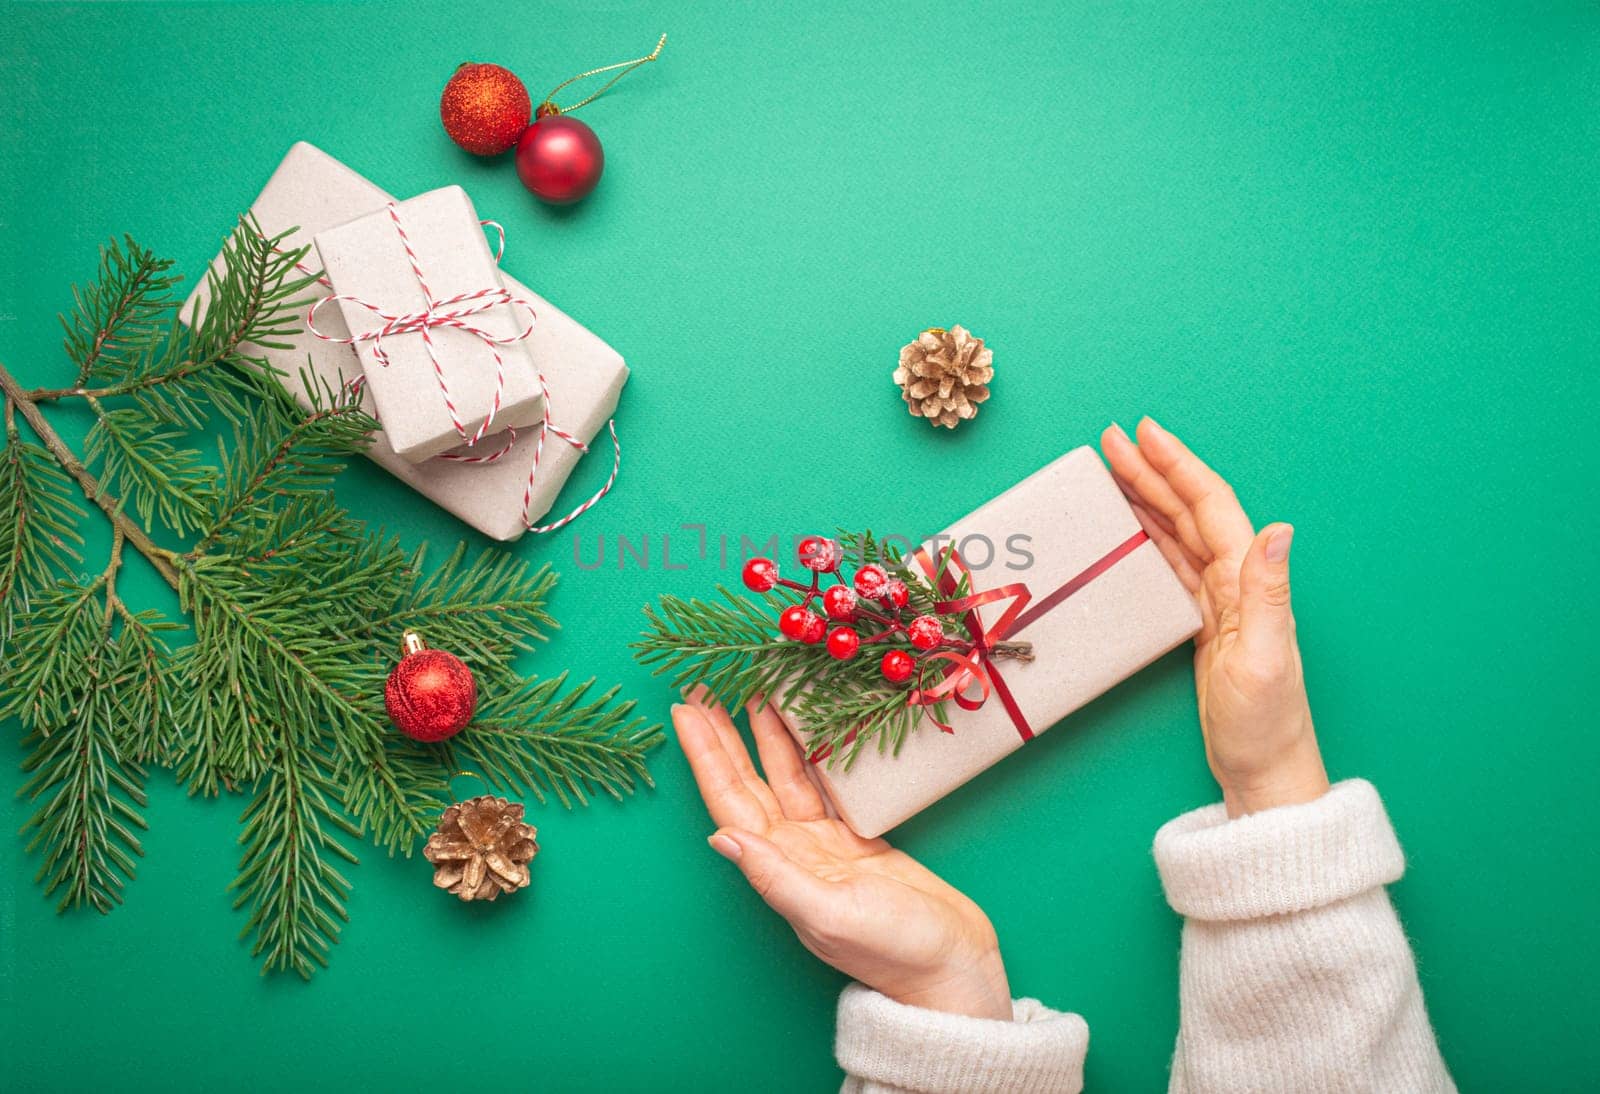 Christmas or New Year celebration green paper festive background with female hands holding wrapped gift box, decoration fir tree, cones, berries, sparkly red balls. Giving presents concept. by its_al_dente